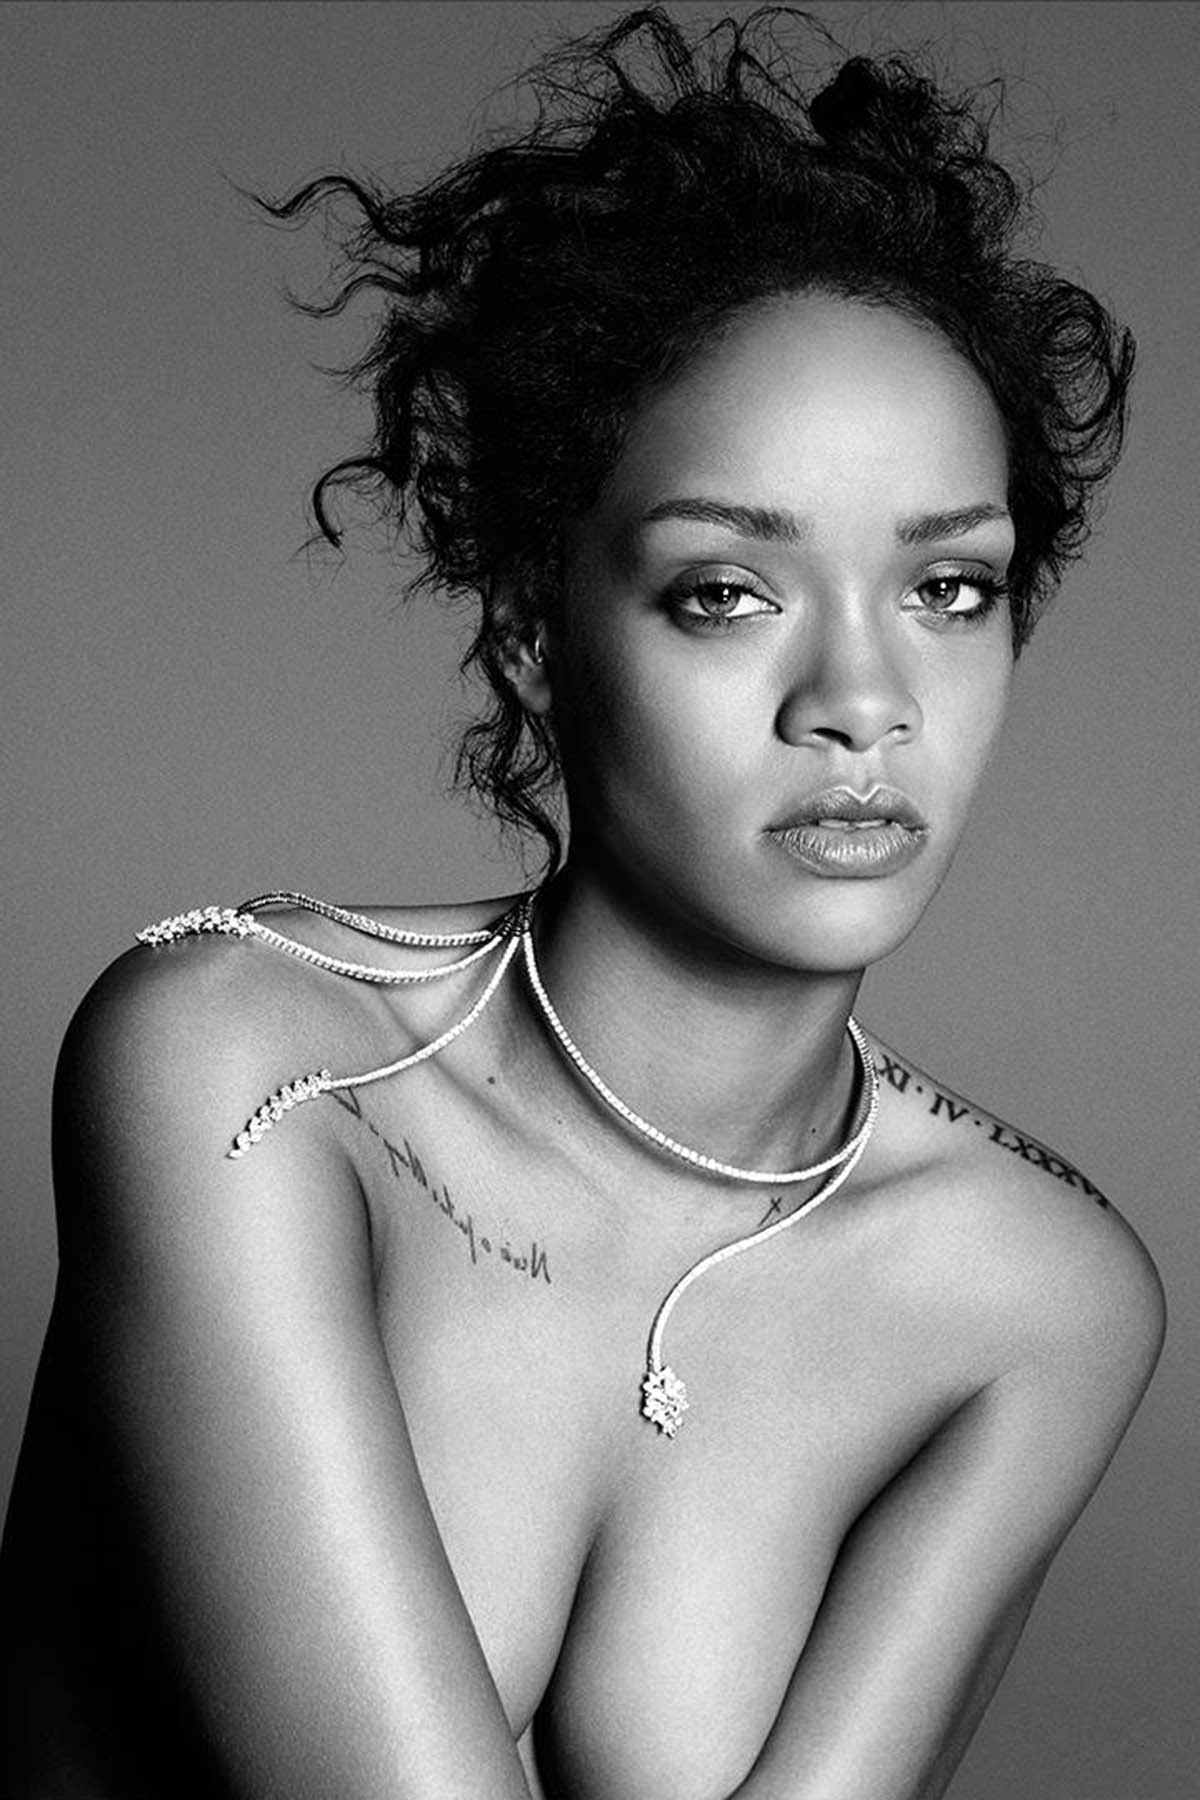  Rihanna for Elle US, December 2014 Photographed by: Paola Kudacki Necklace by: Yeprem 